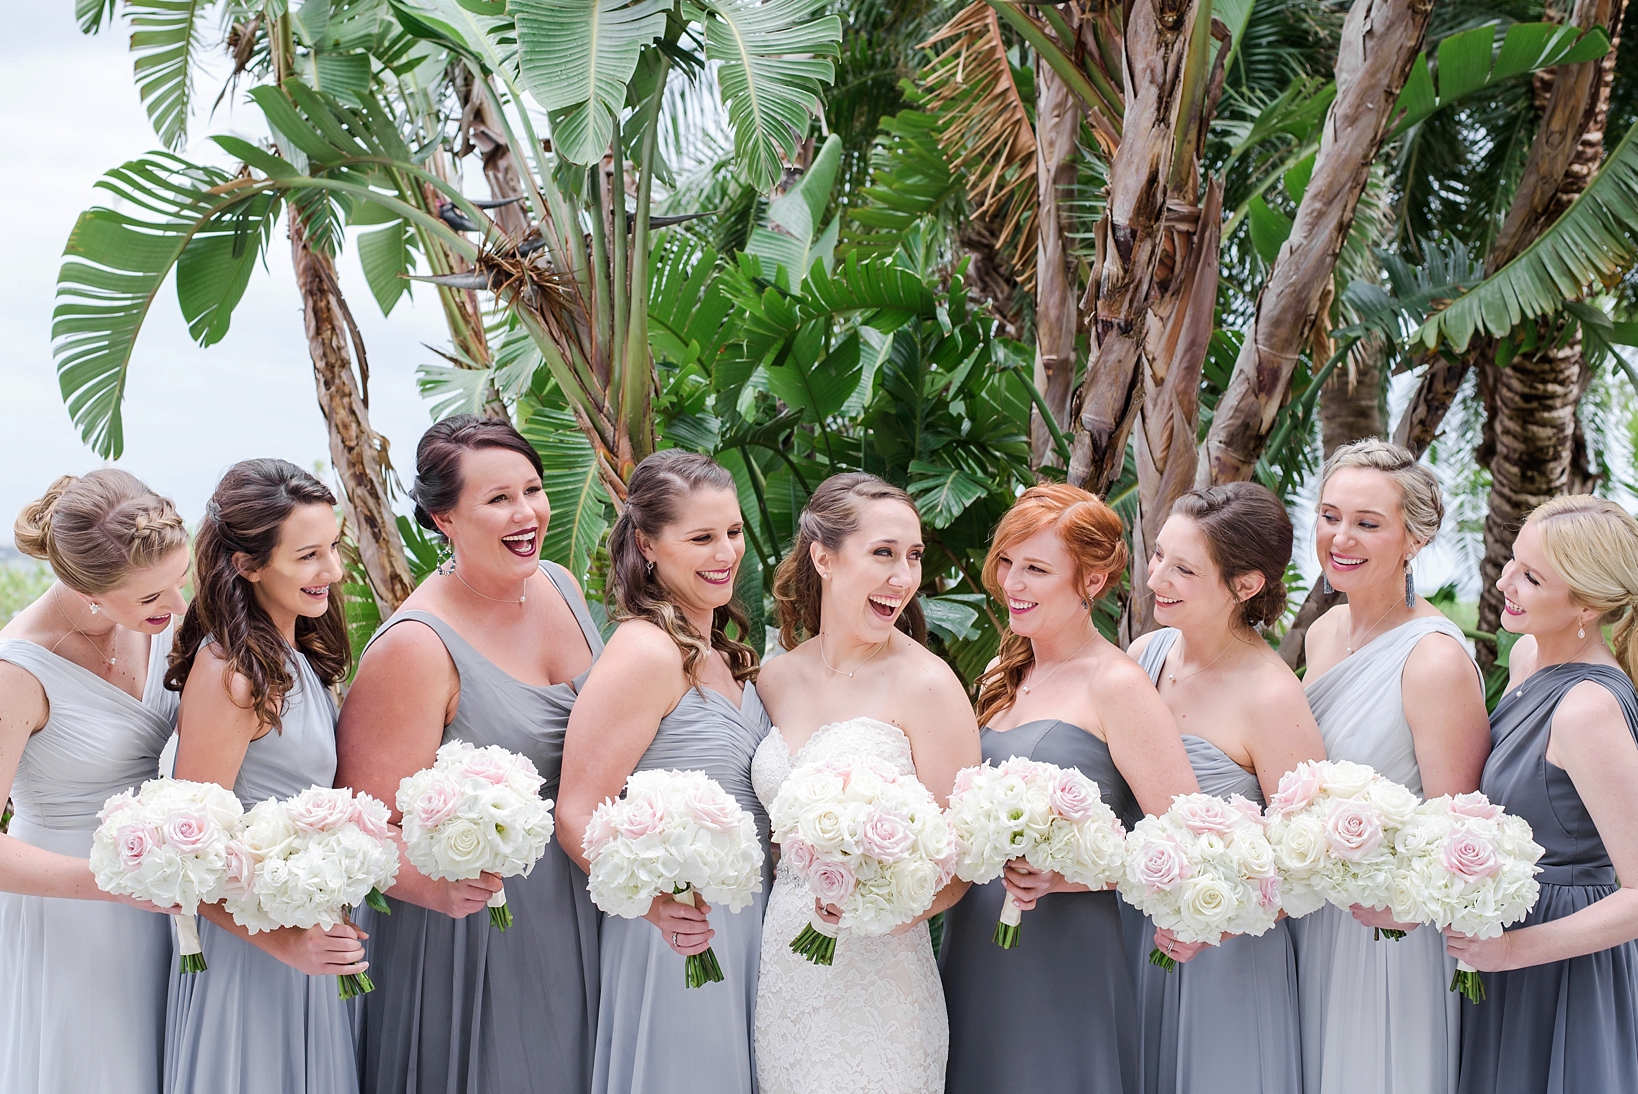 Bride and her Bridesmaids laughing together while holding their bouquets